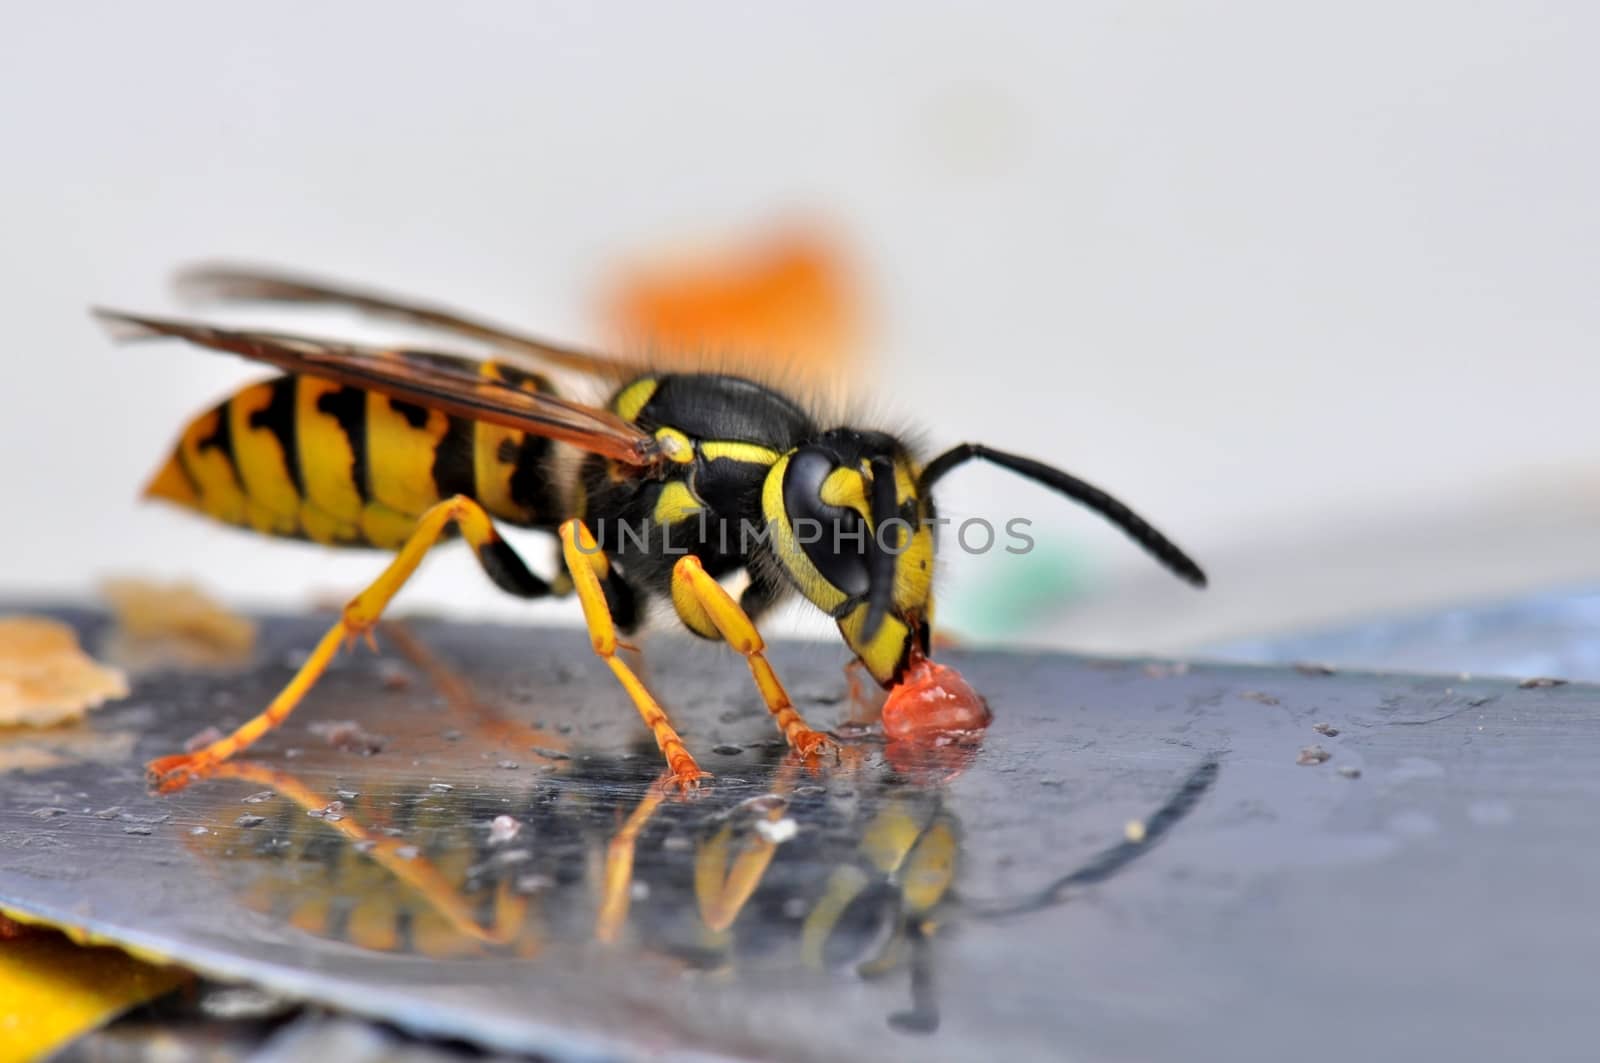 Macro of a wasp on a bread knife